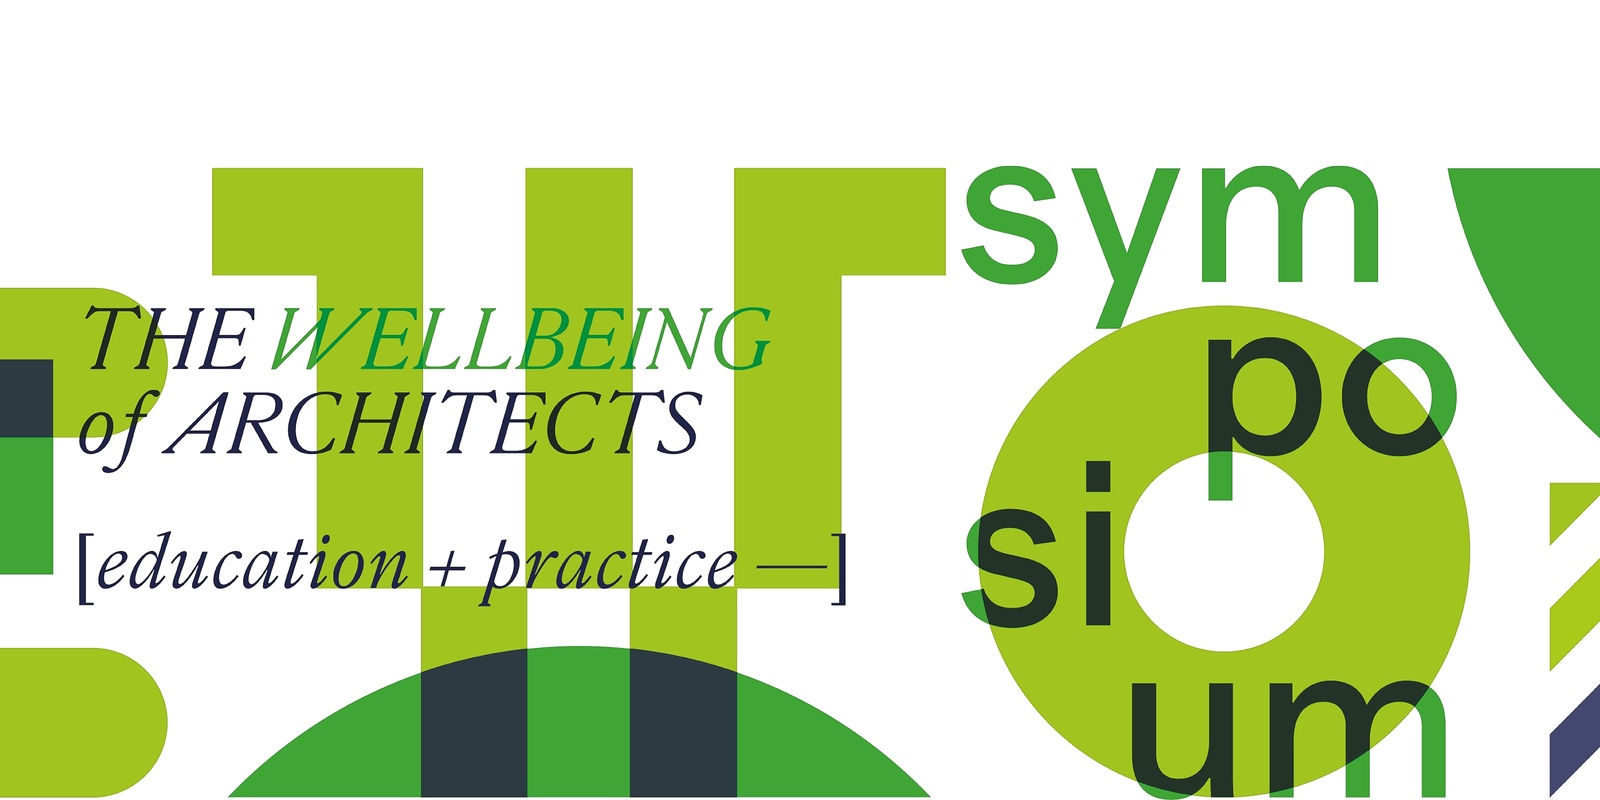 Banner image for The Wellbeing of Architects Symposium